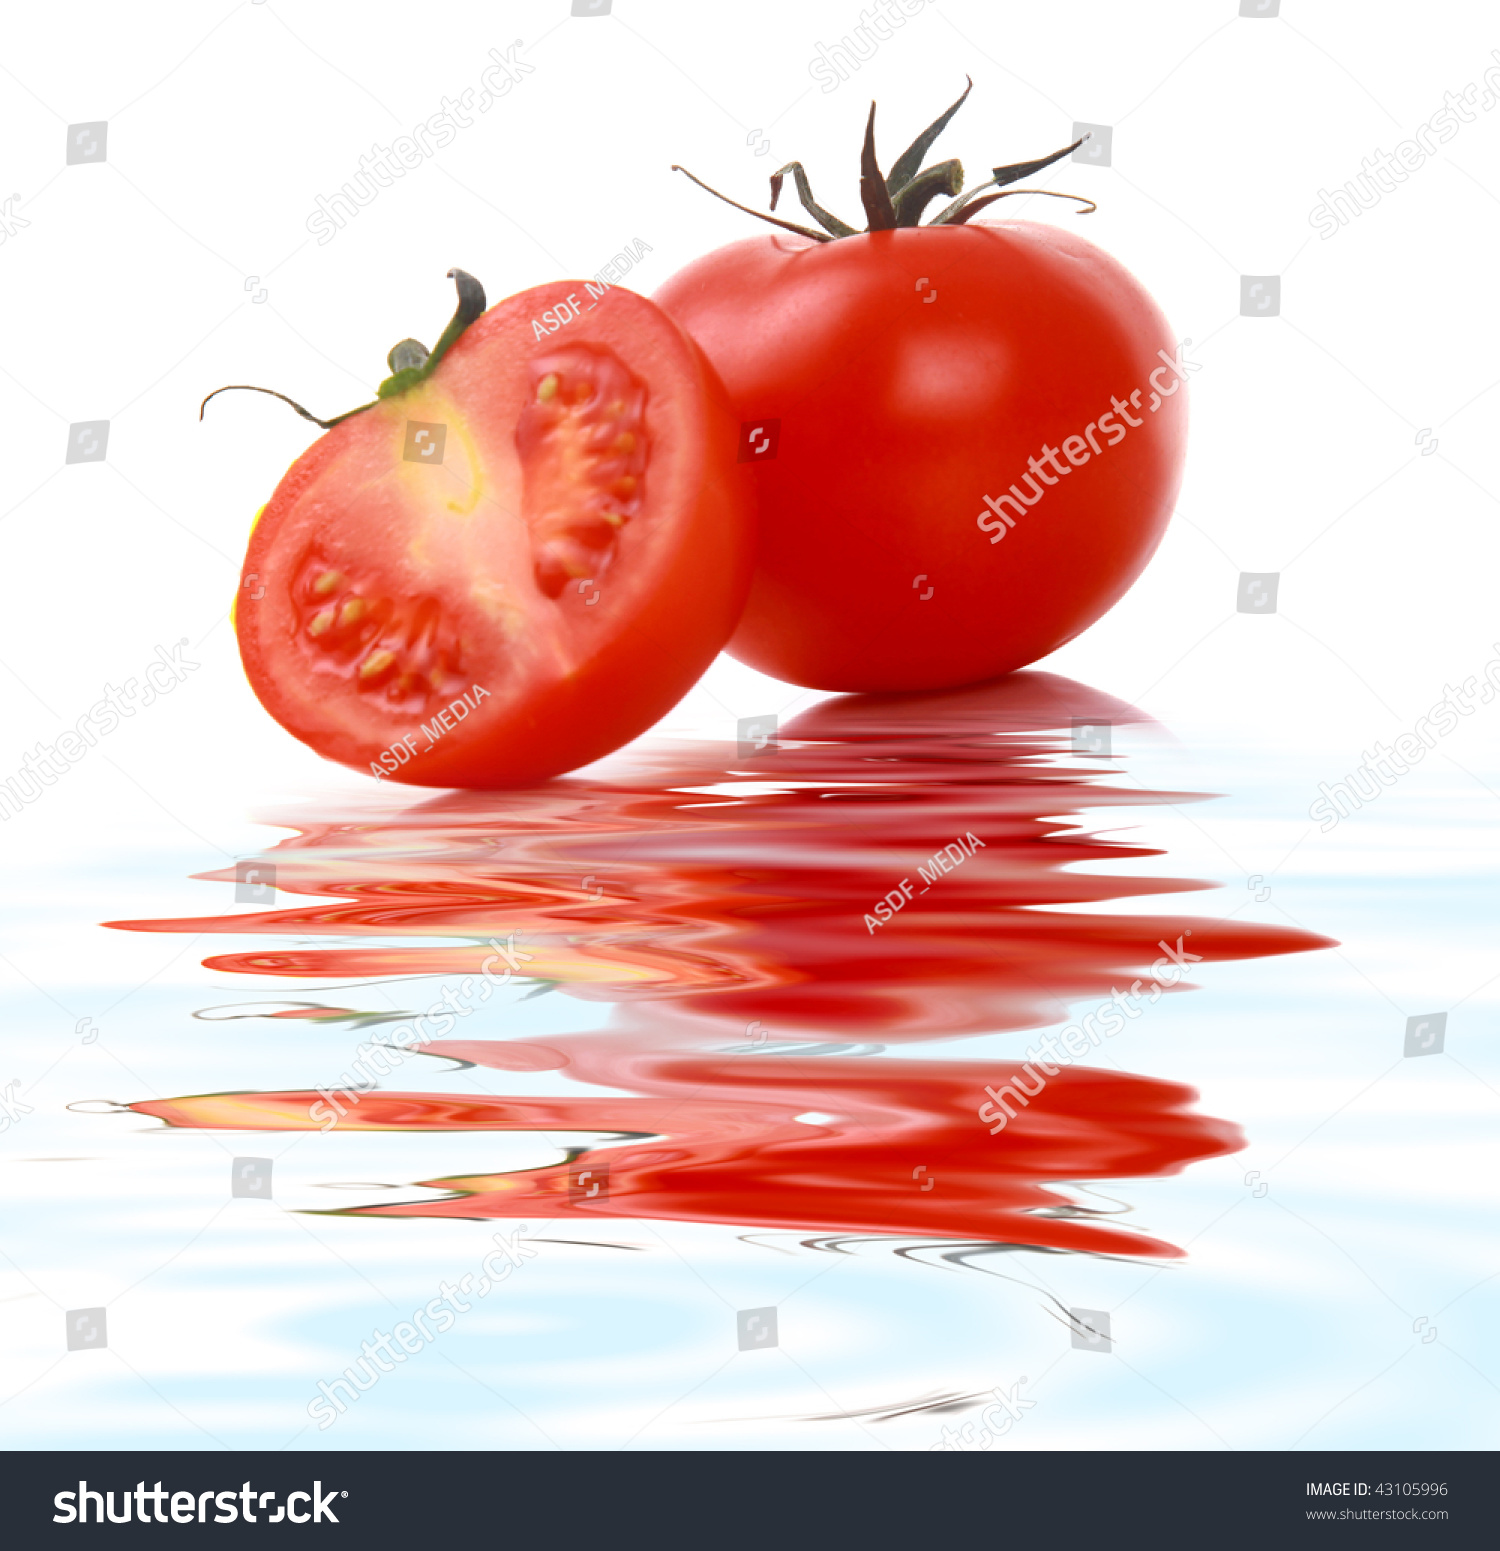 Two Ripe Tomatoes Reflection Stock Photo 43105996 - Shutterstock